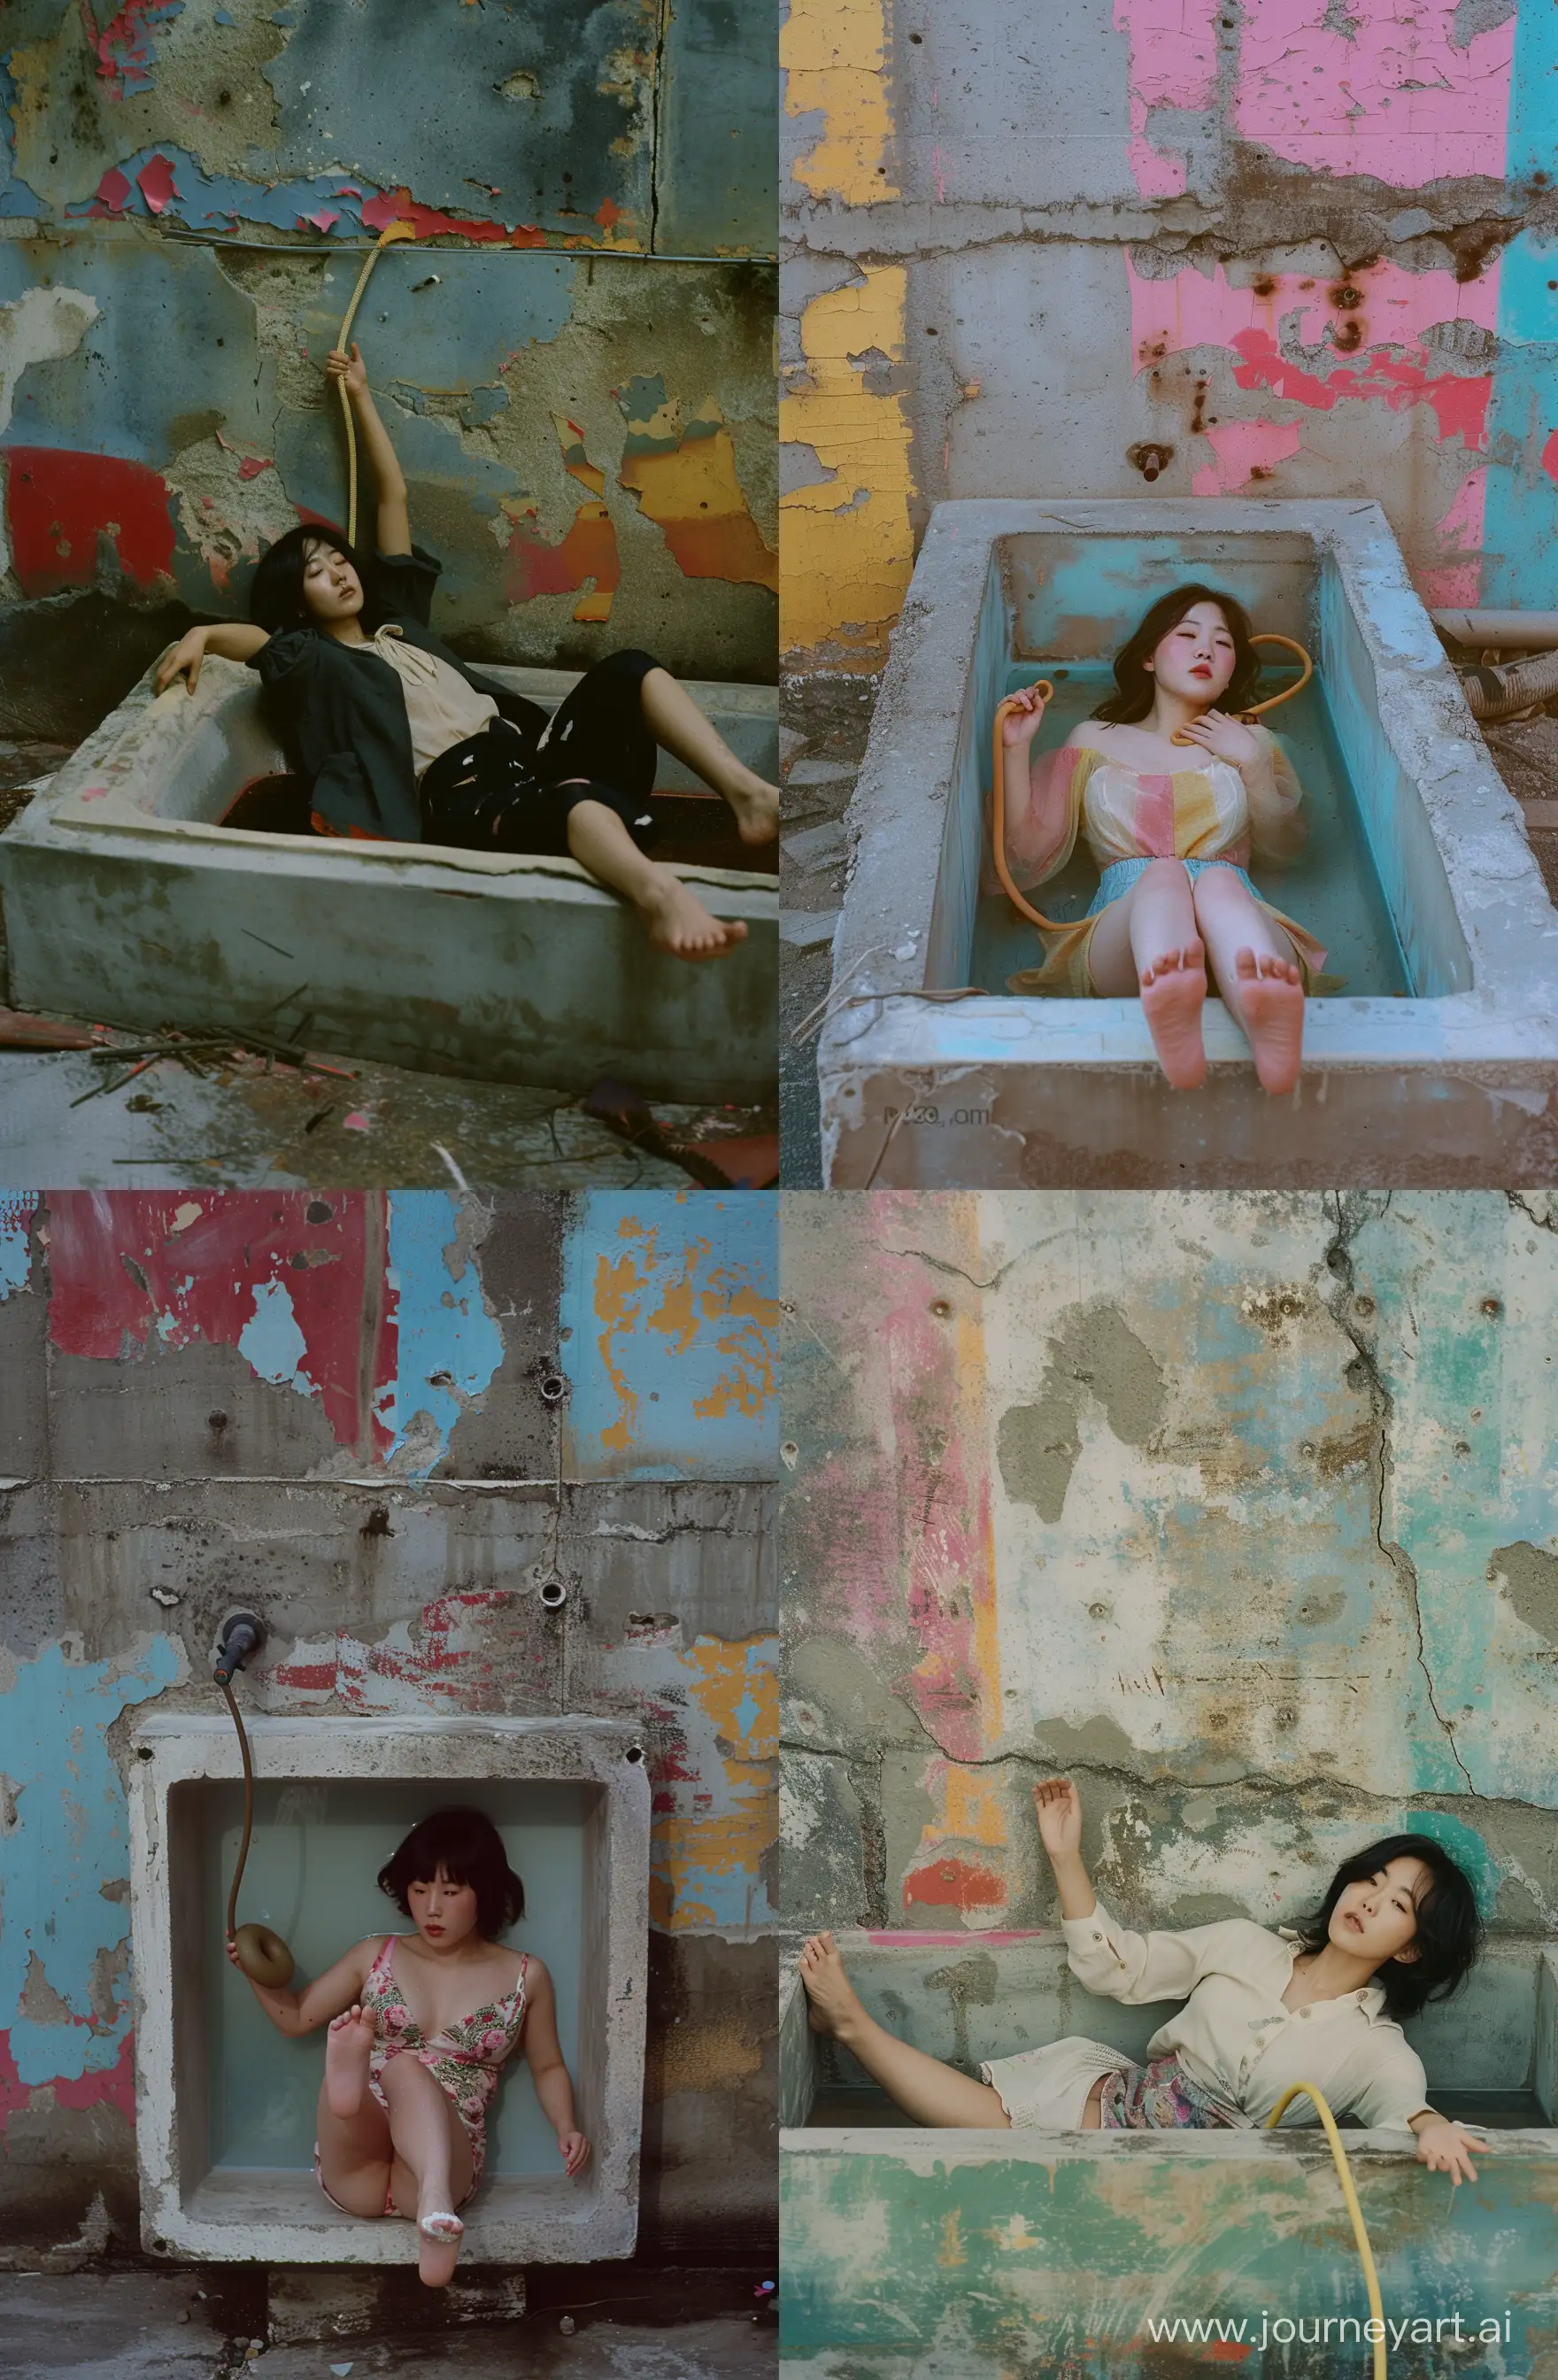 Korean-Woman-Playfully-Confesses-in-Colorful-Bathtub-Installation